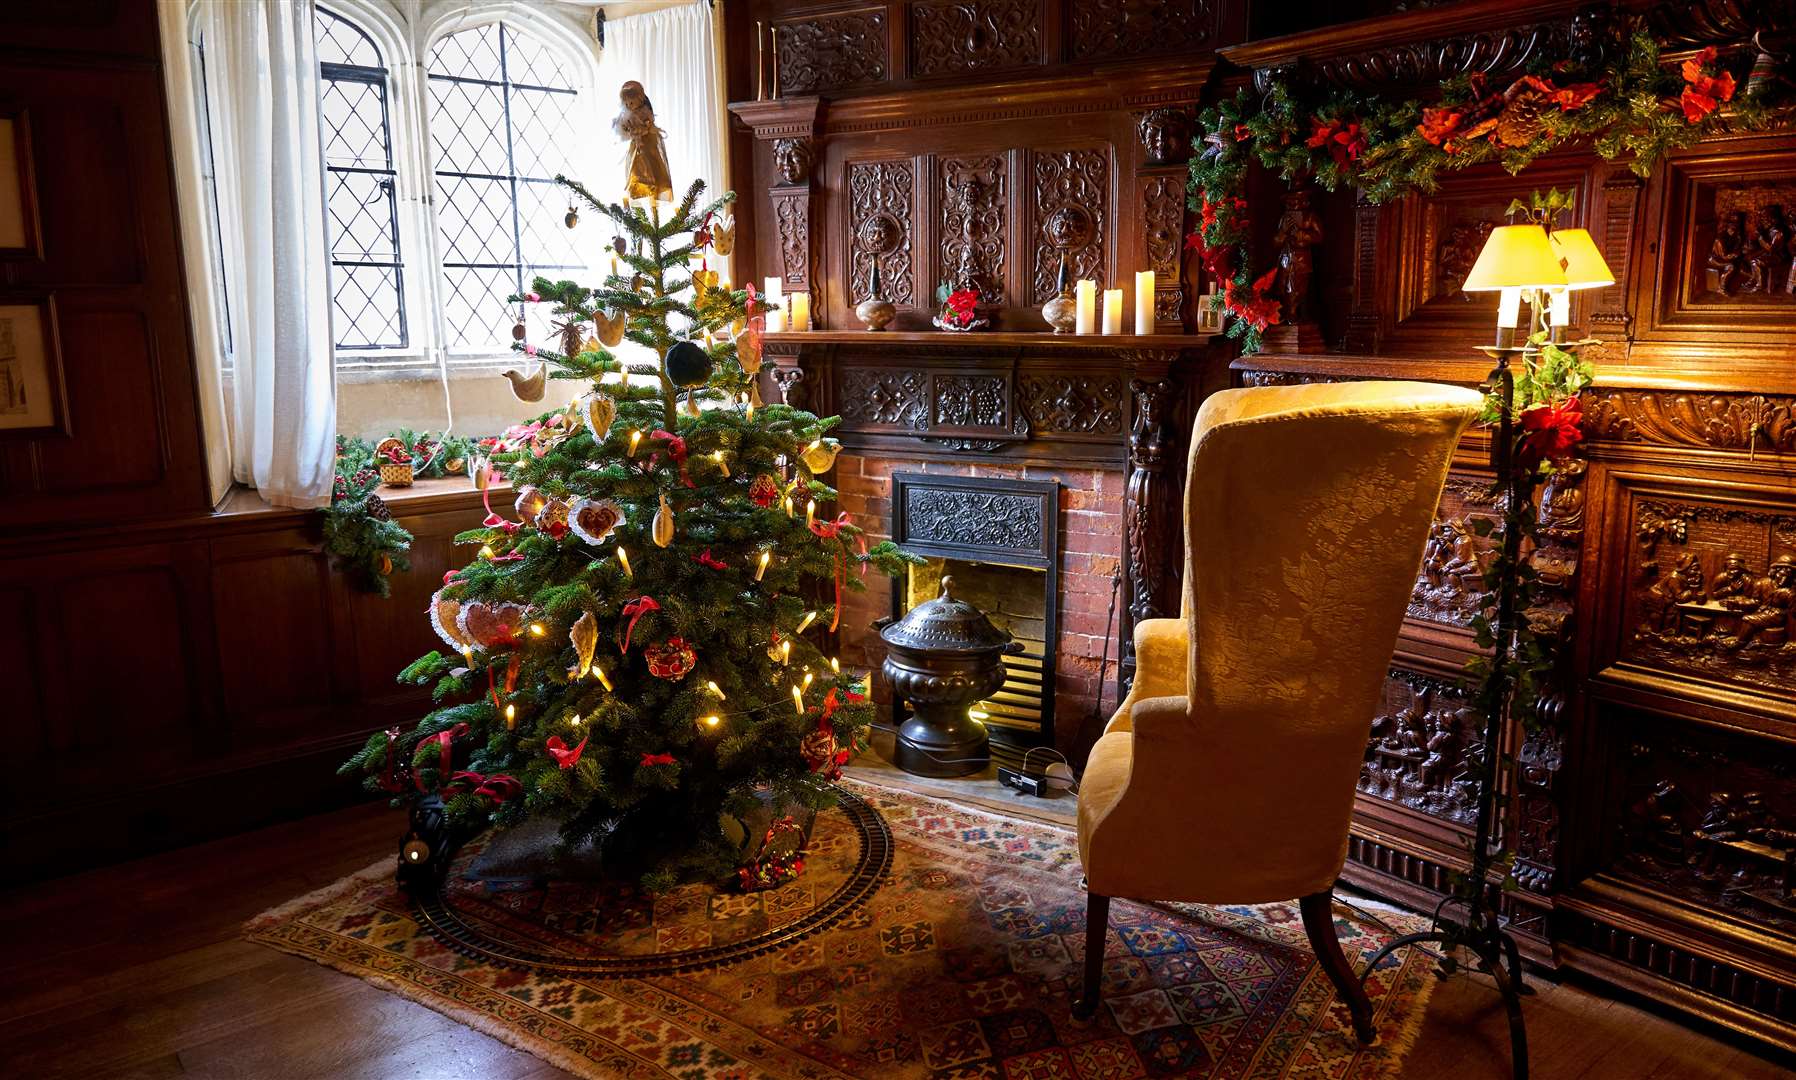 There will be lots of traditional decorations inside the Tudor rooms at Ightham Mote. Picture: National Trust Images / Arnhel de Serra